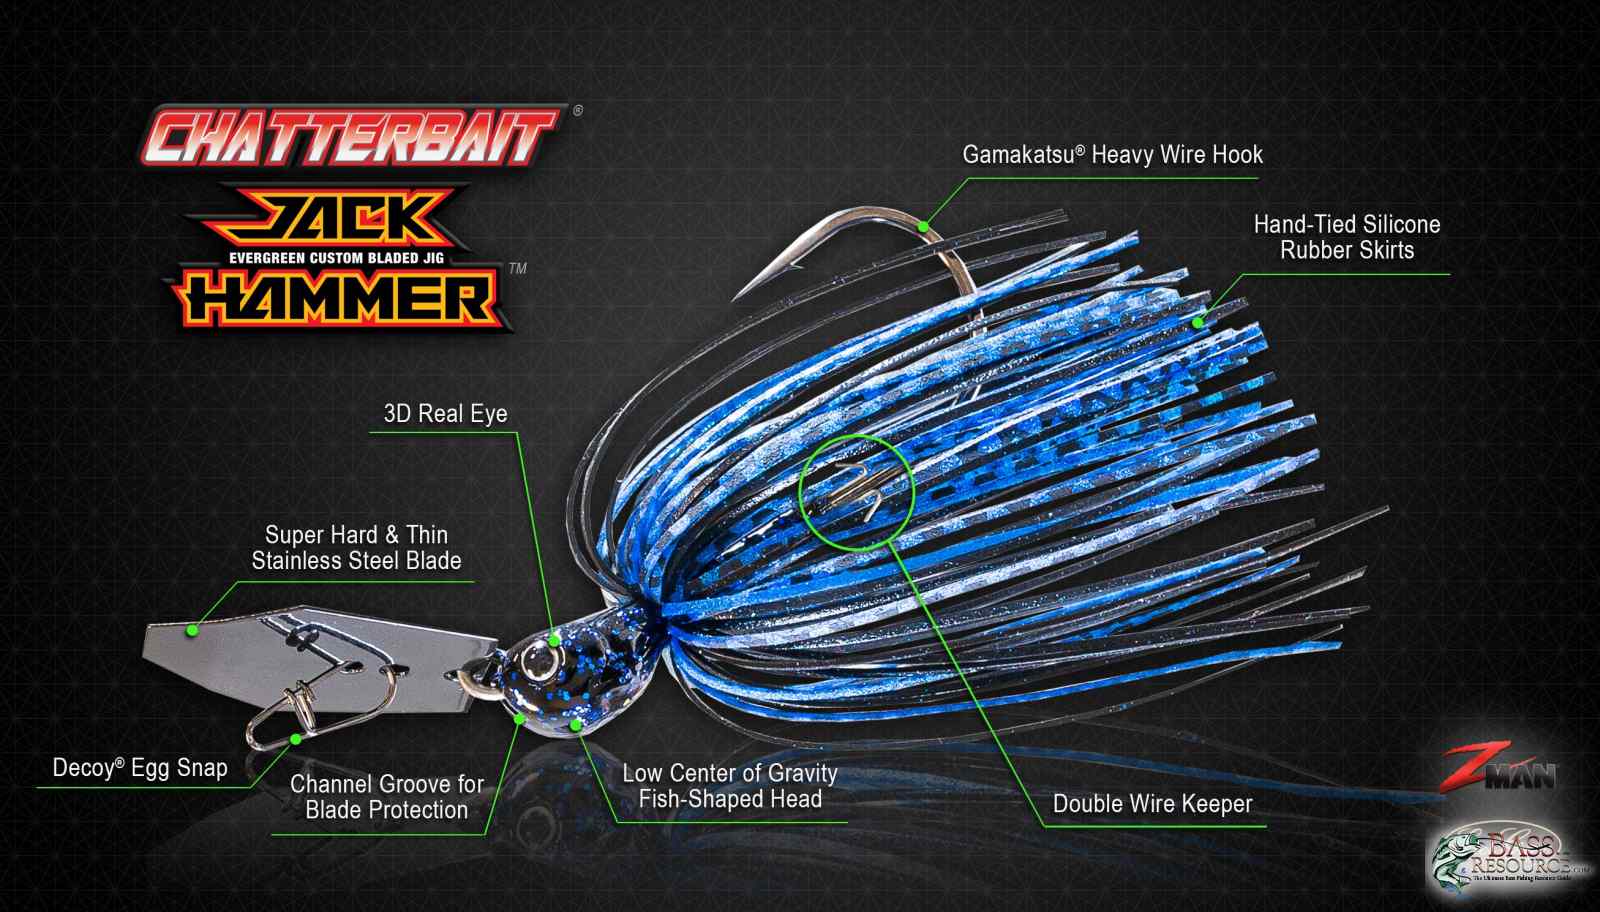 New Jack Hammer Bladed Jig from Z-Man - Fishing Tackle - Bass Fishing Forums